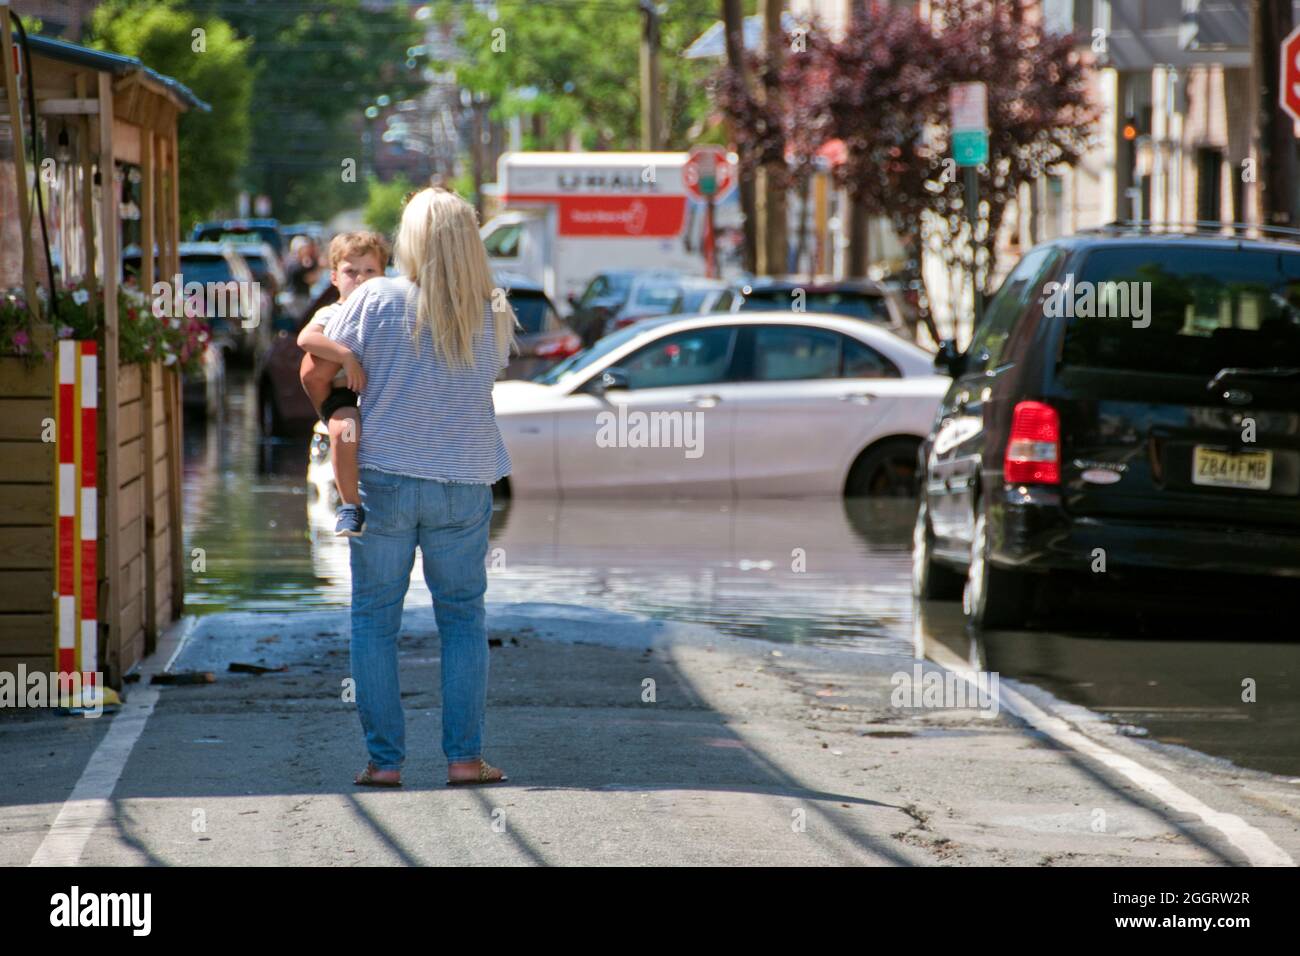 A woman with child looks at flooded cars on a street in Hoboken, New Jersey, caused by Hurricane Ida rain, Sept. 1 2021. Stock Photo